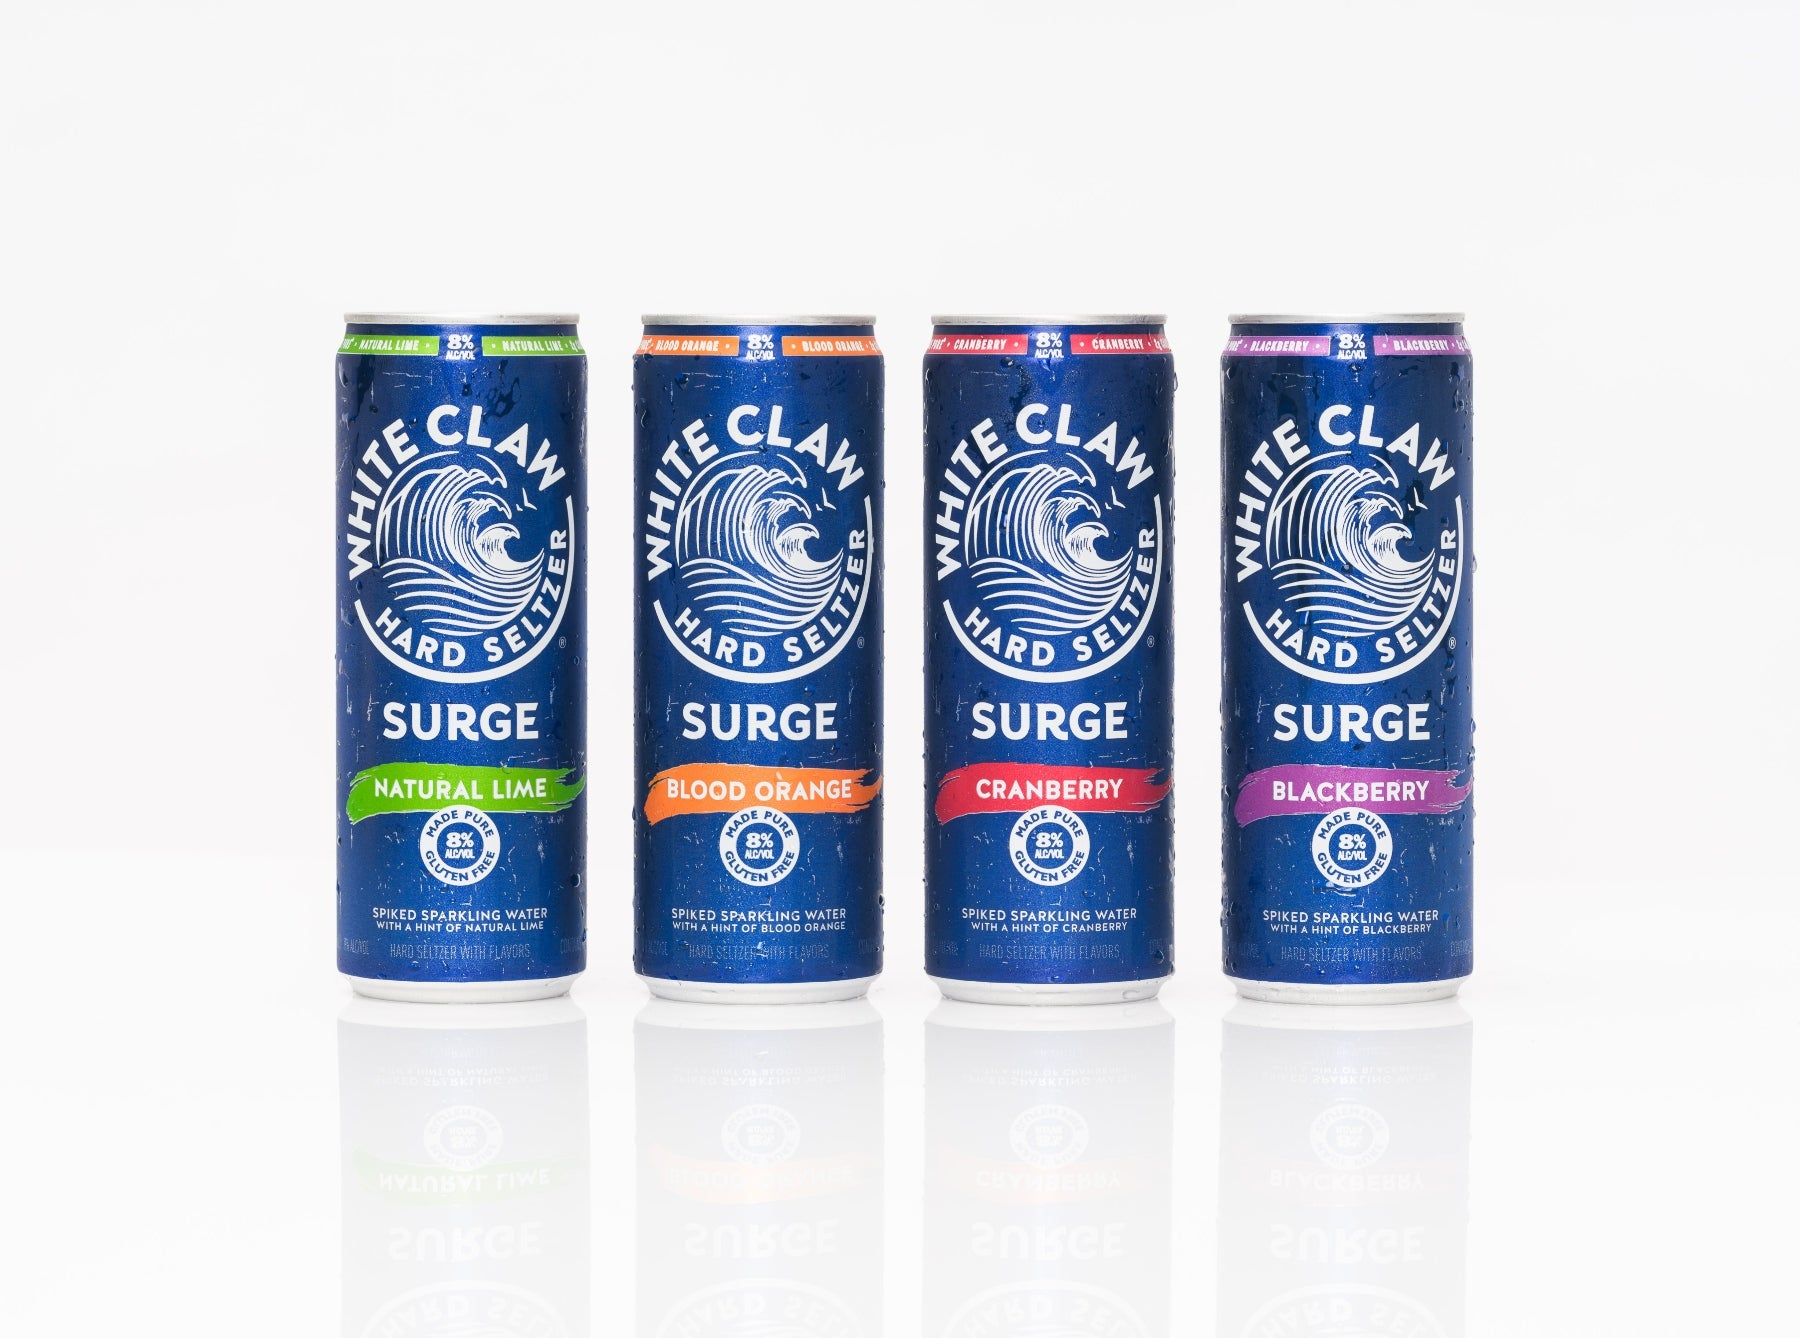 Let’s Toast: White Claw Hard Seltzer Surge